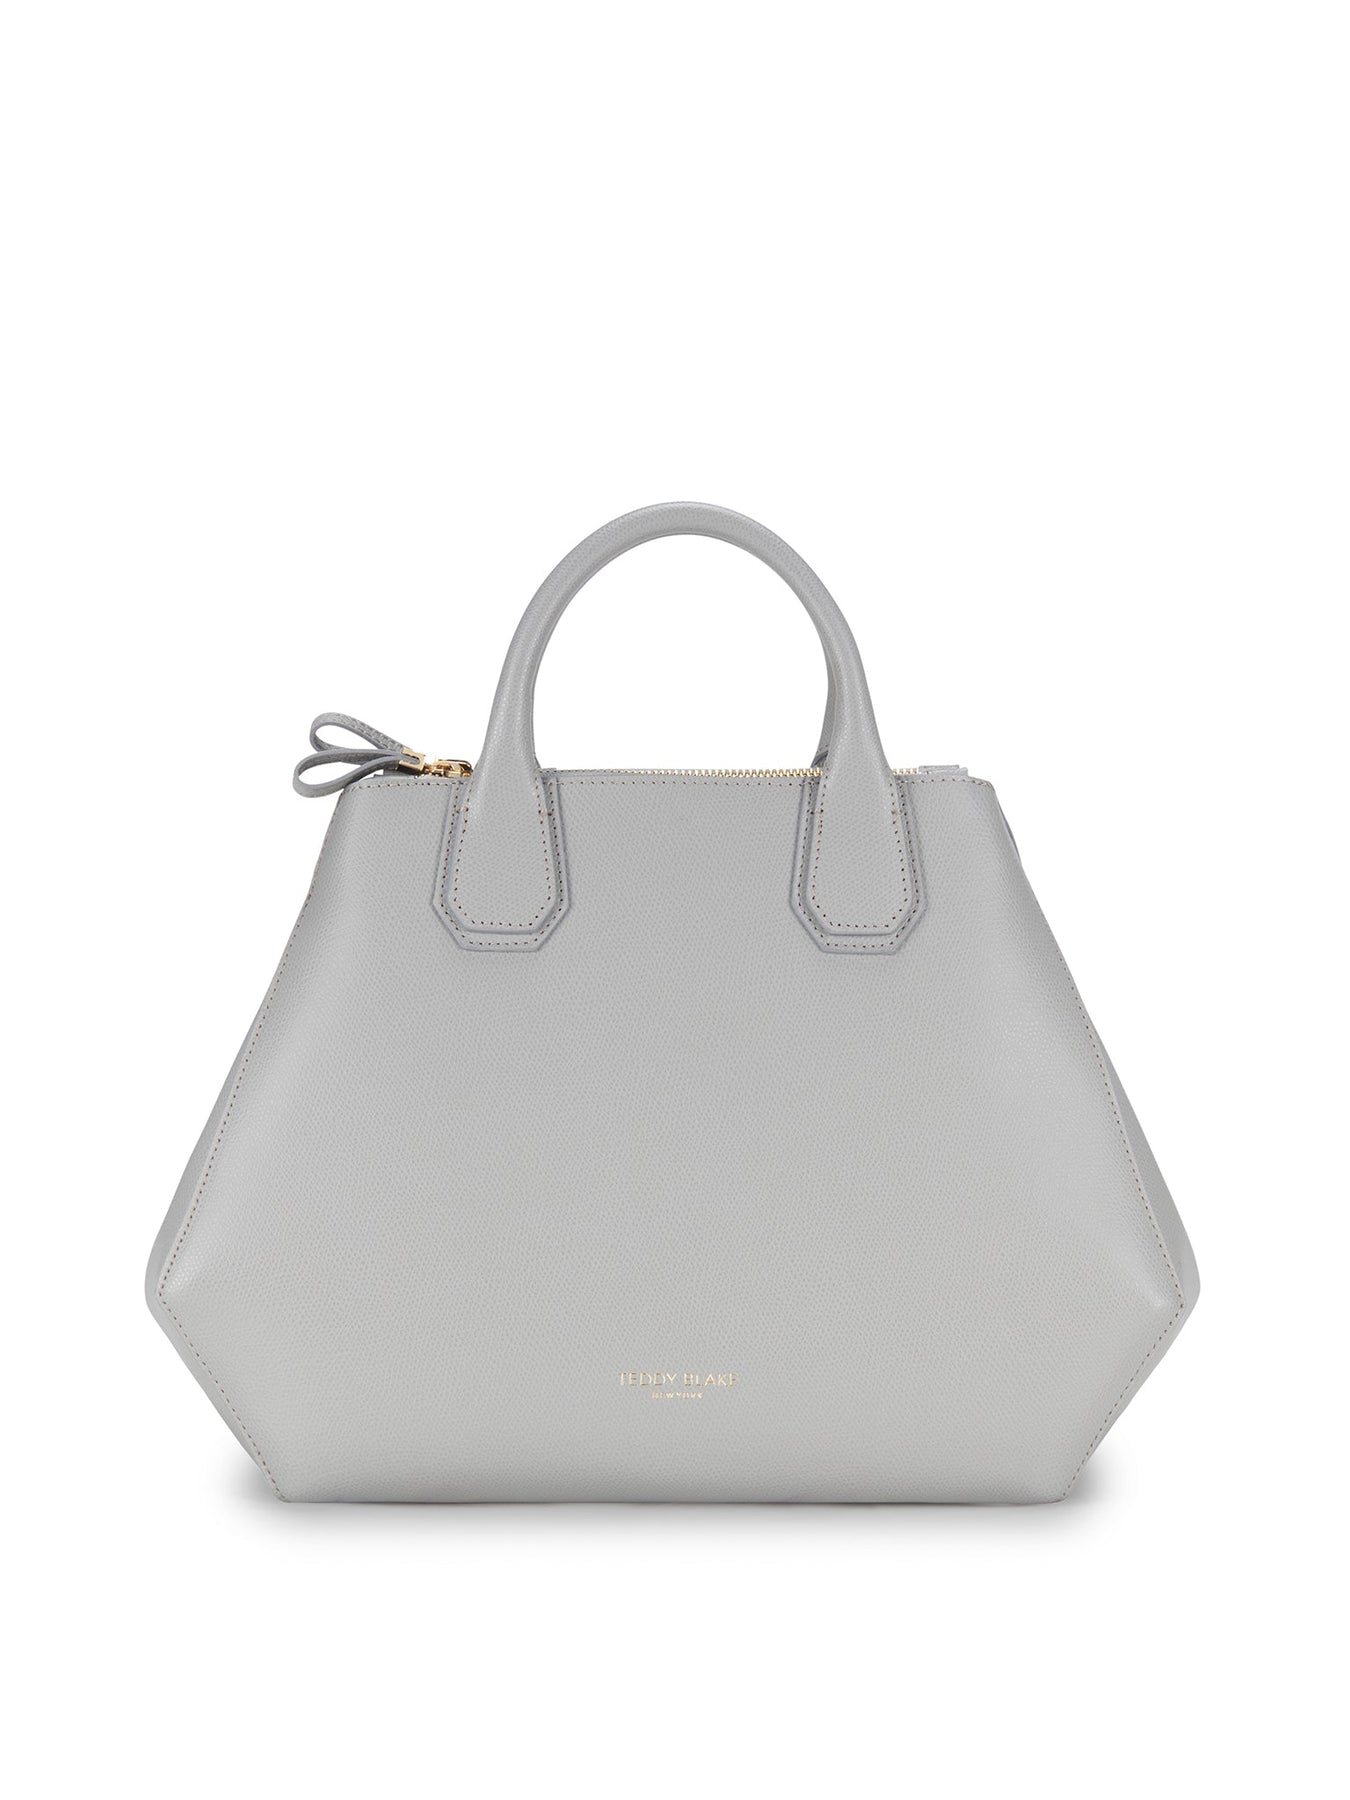 Givenchy Antigona Medium Soft-grained Leather Tote In Pearl Grey